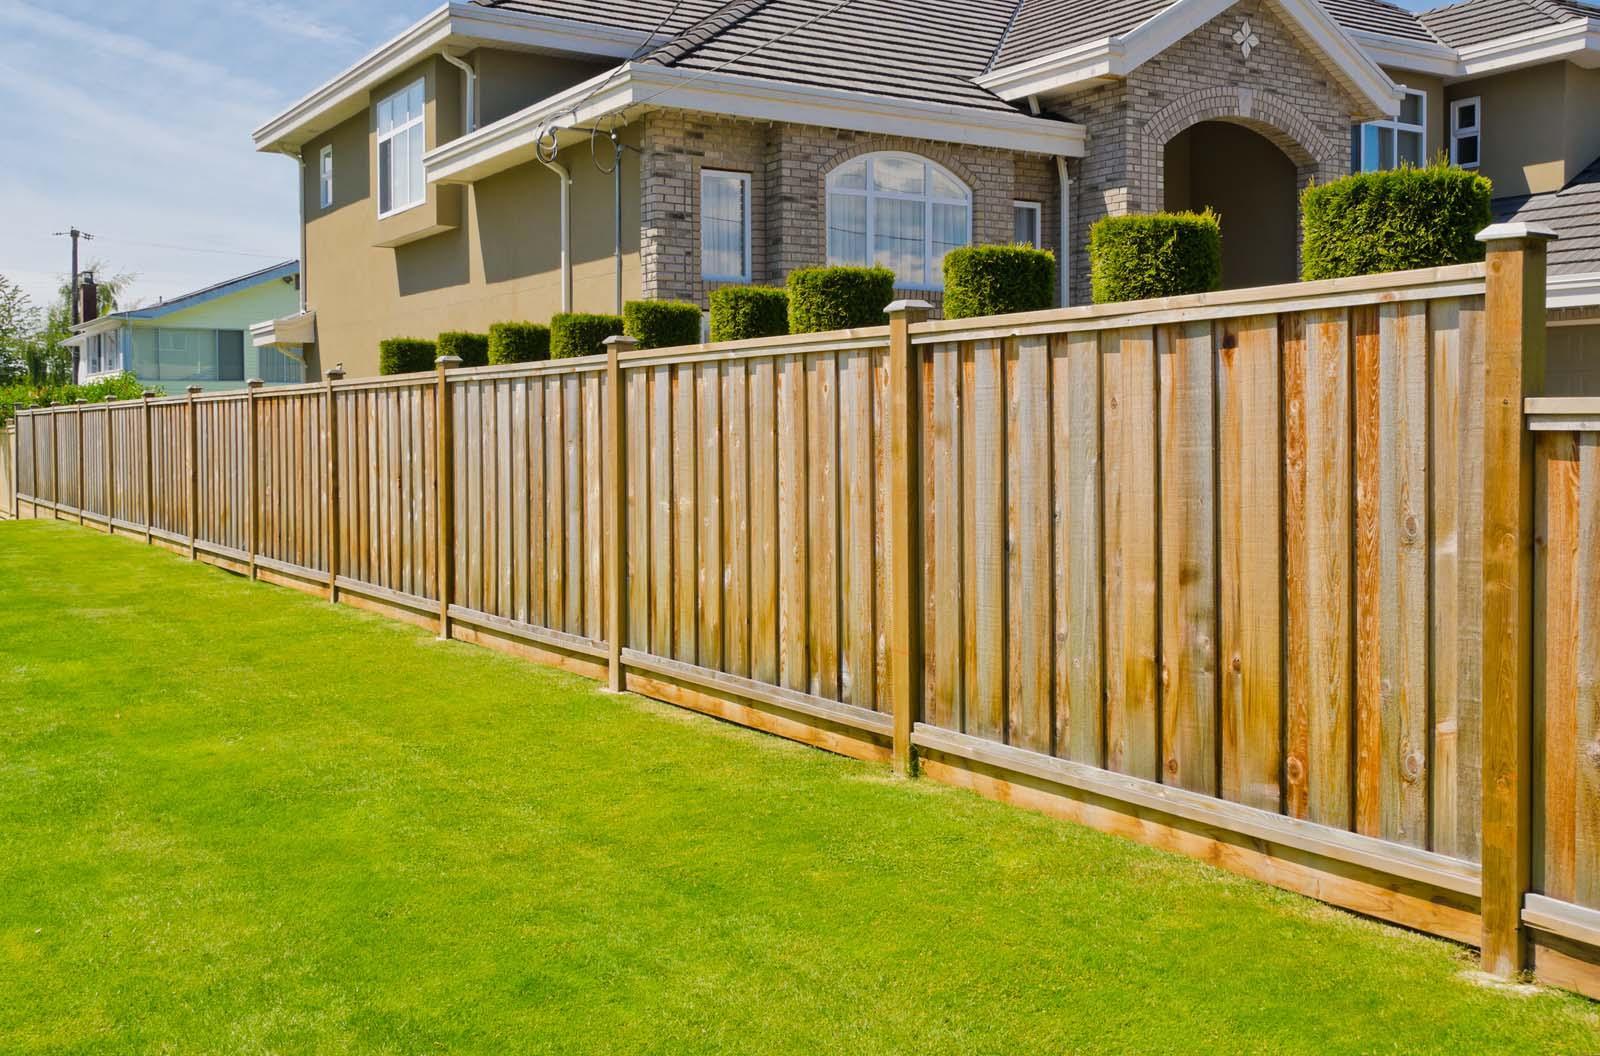 5 Signs of a Trustworthy and Professional Fencing Contractor